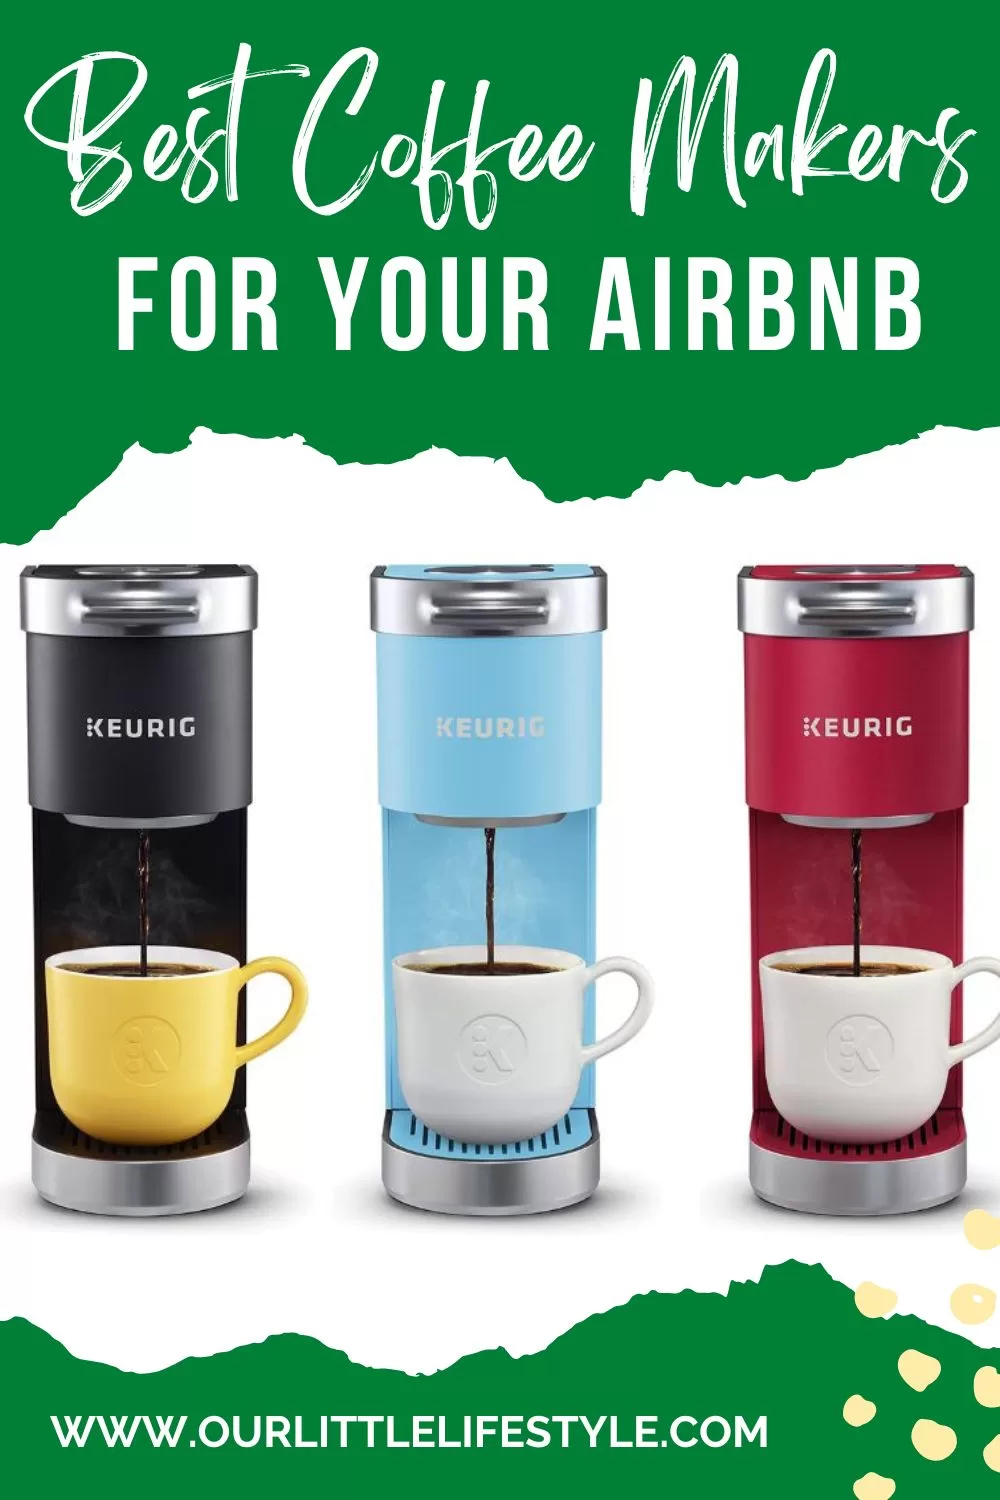 Best Coffee Maker for Airbnb Rentals